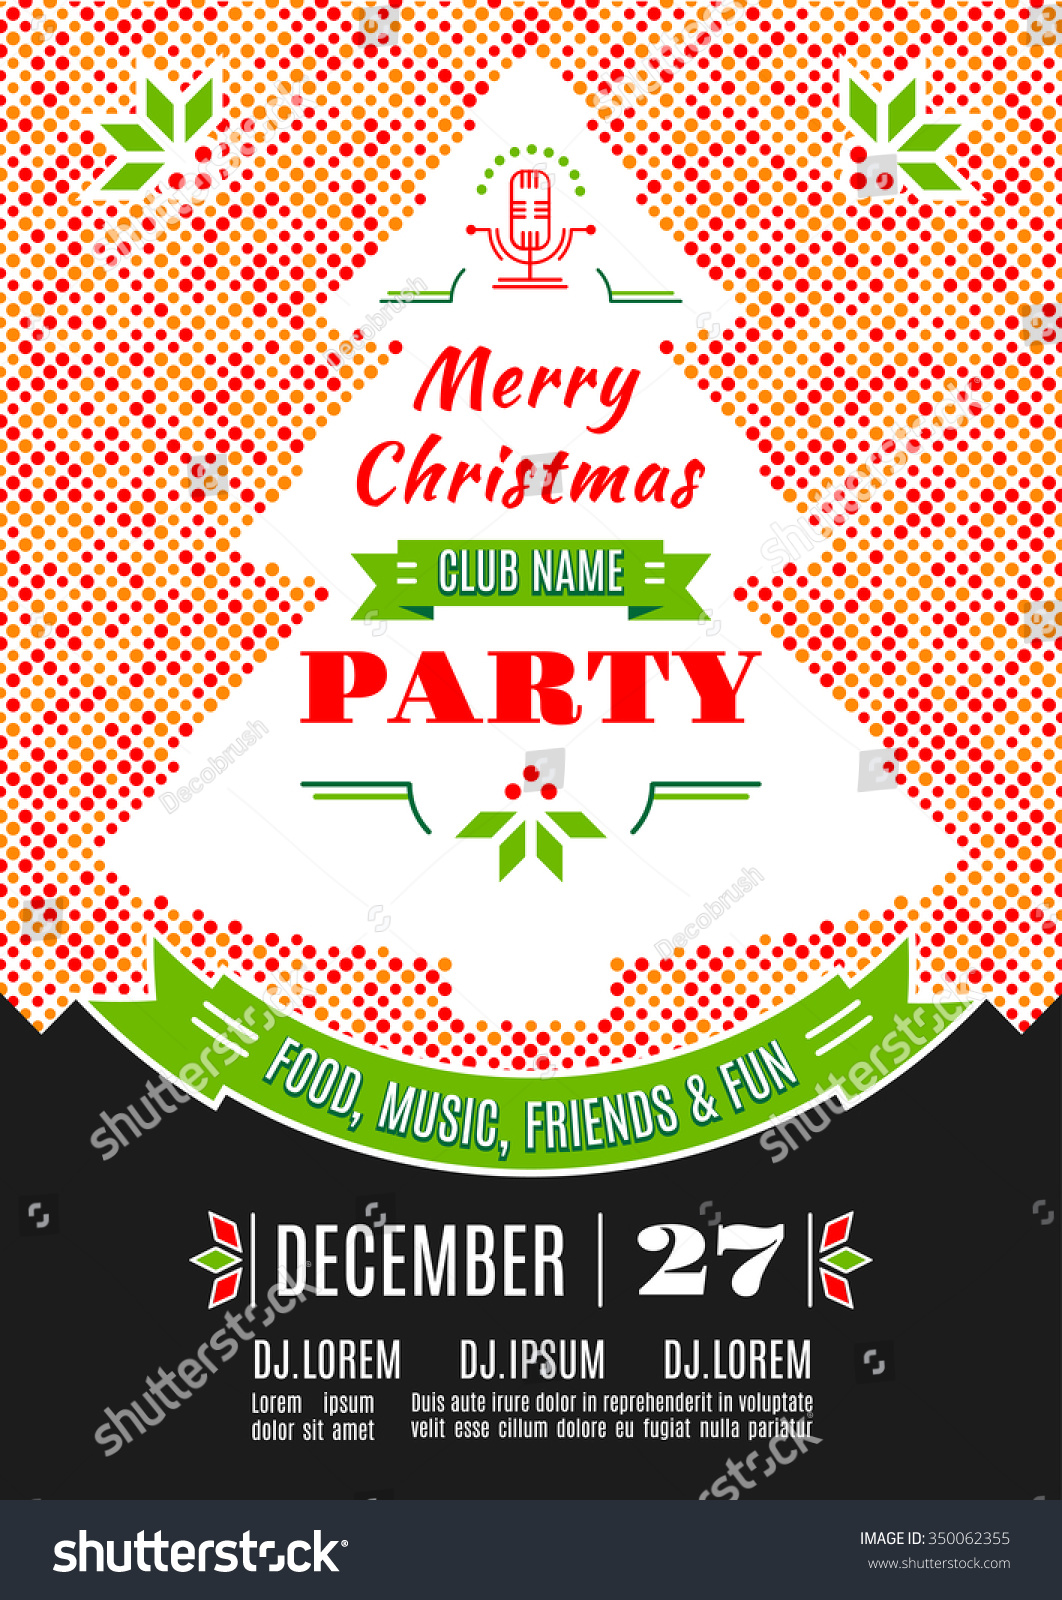 Christmas Party Invitation Modern Typography Ornament Stock Vector Royalty Free